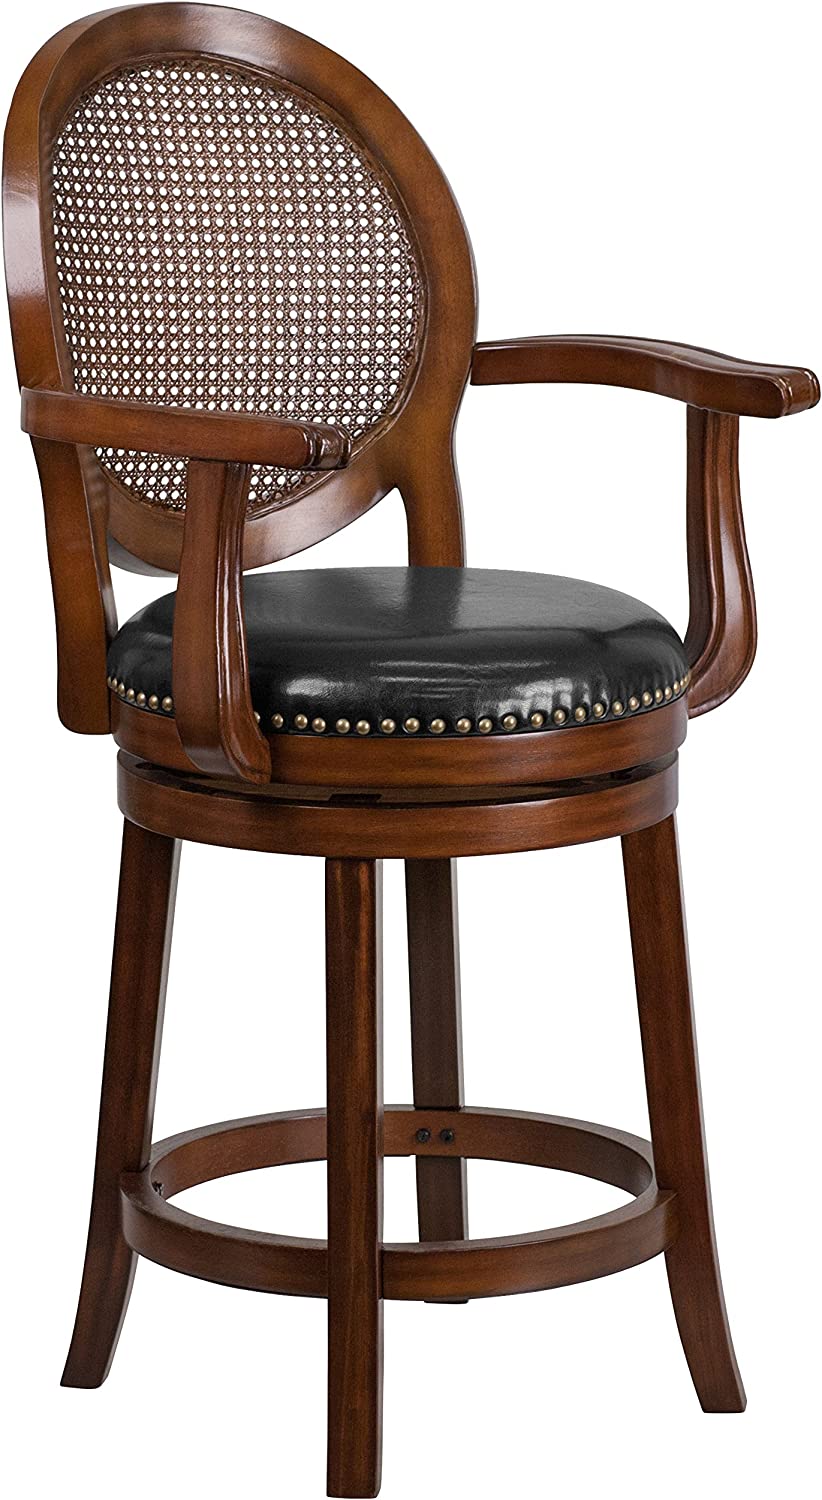 Flash Furniture 26&#39;&#39; High Expresso Wood Counter Height Stool with Arms, Woven Rattan Back and Black LeatherSoft Swivel Seat